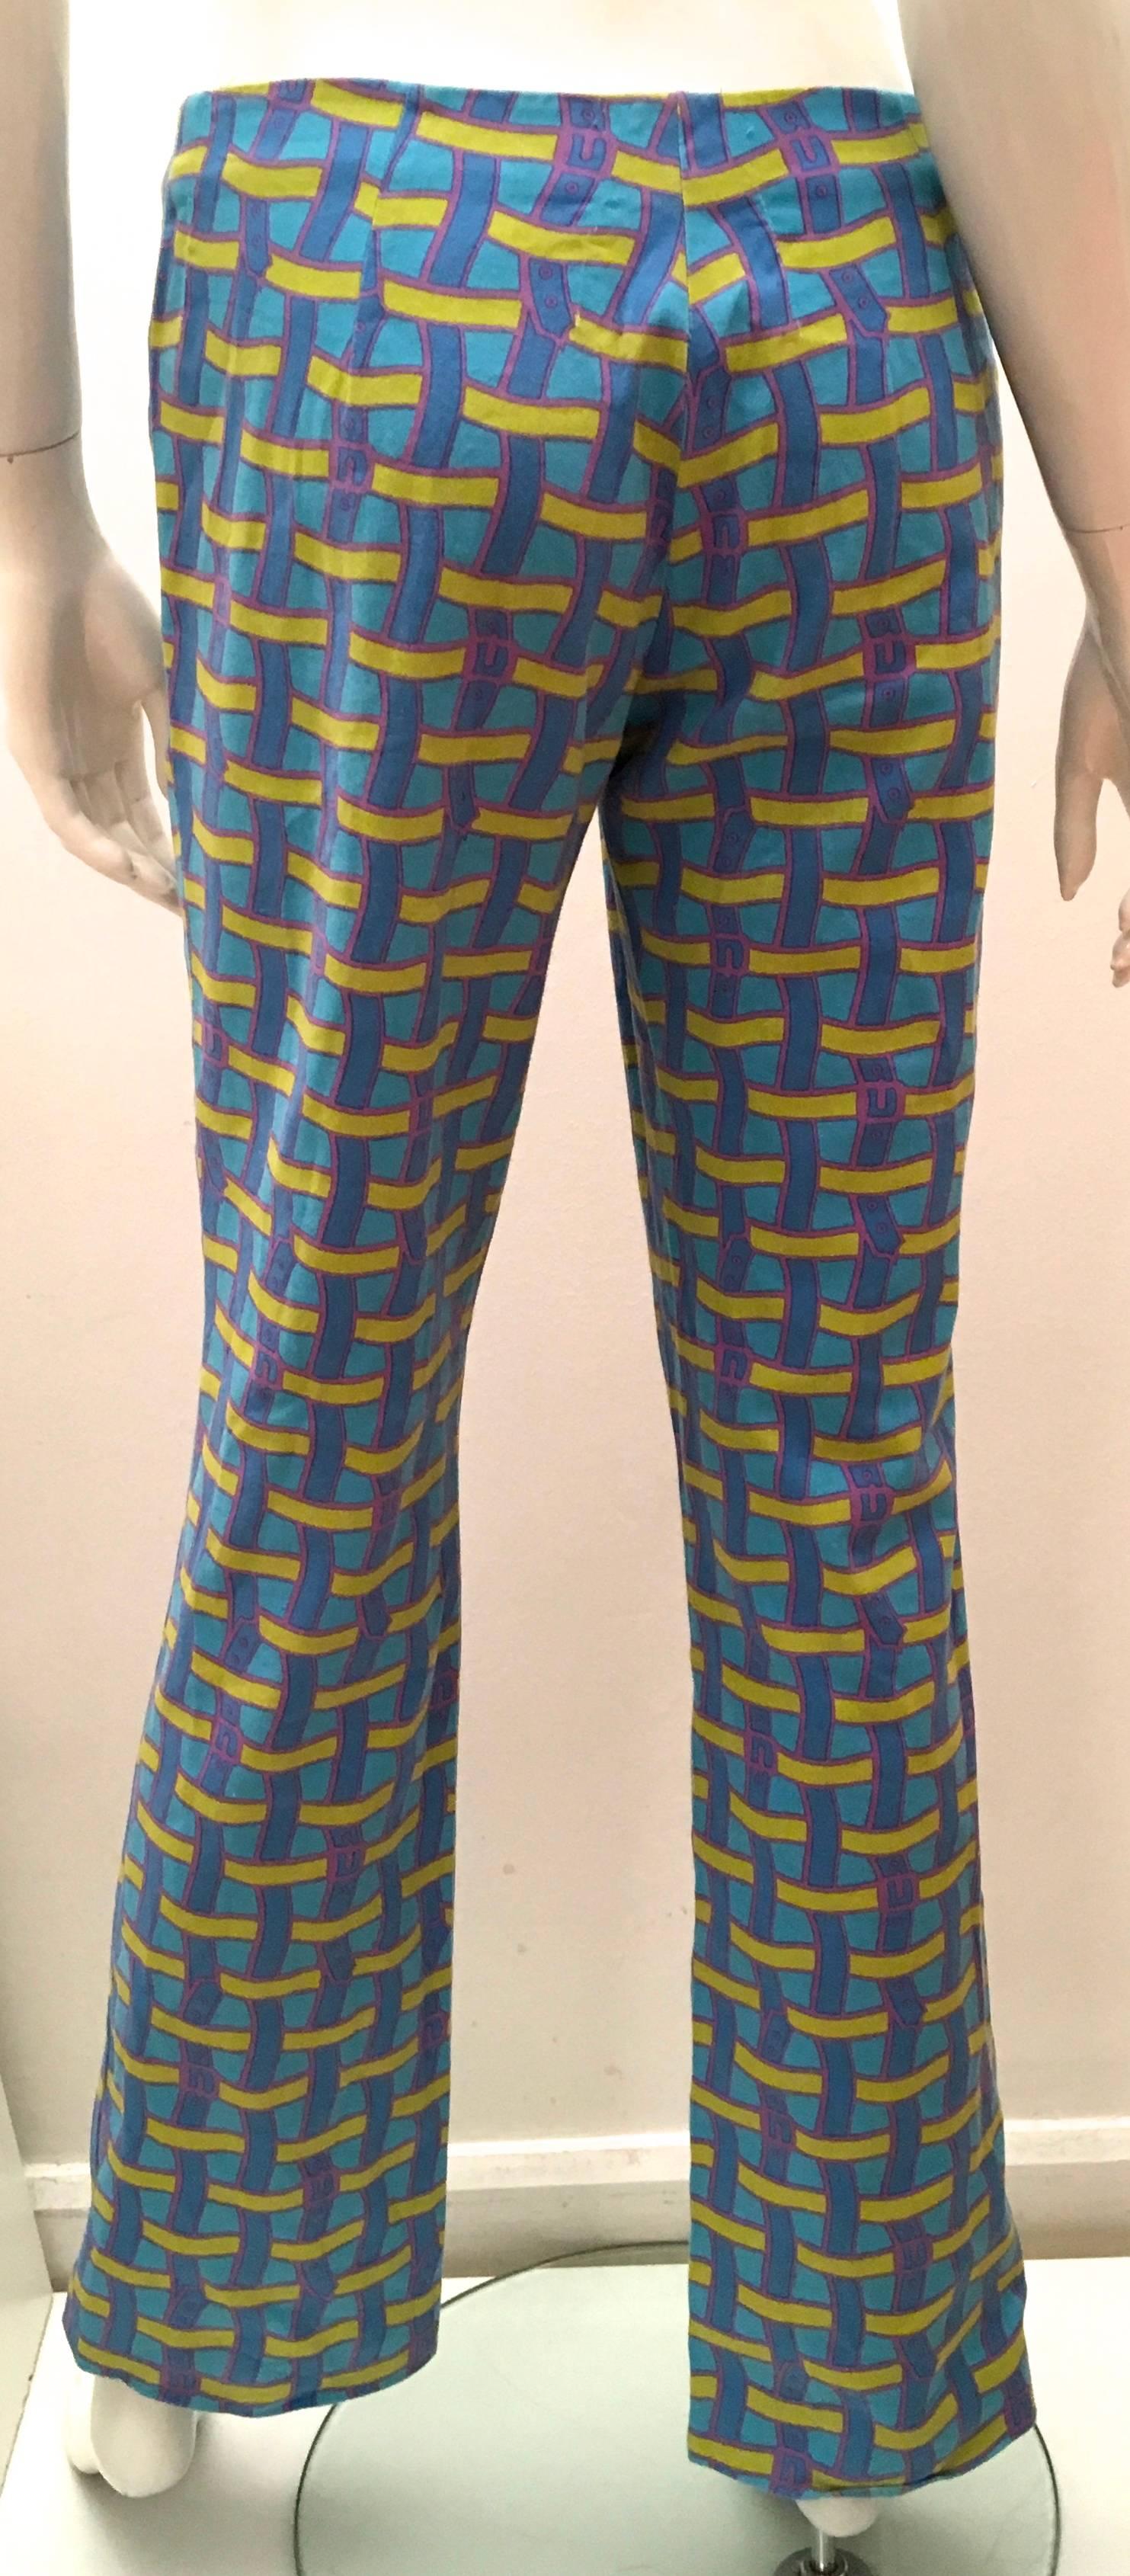 Presented here is a fabulous pair of pants from Roberta di Camerino. These rare pants are a beautiful pattern comprised of light blue, blue, light olive green and light purple. The graphics are images of a weaving of what appear to be varying colors